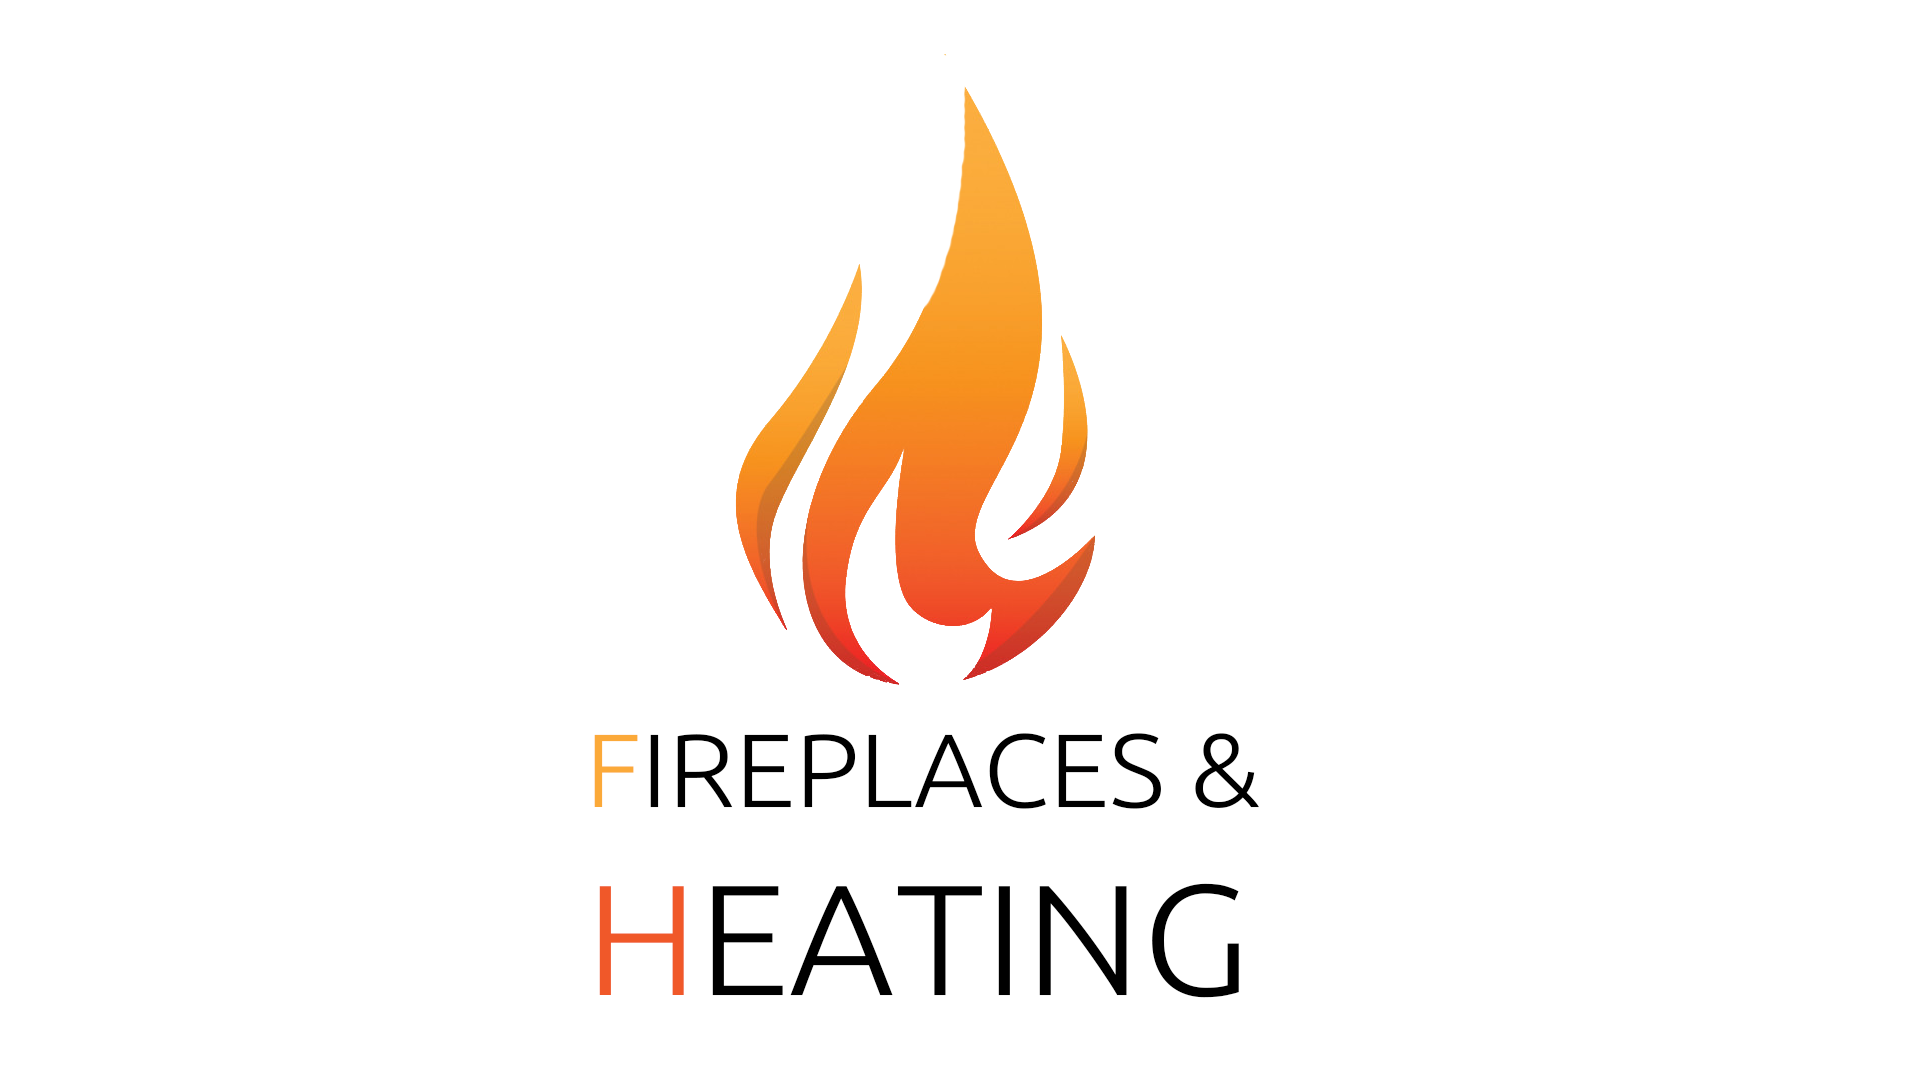 Fireplaces and heating - boiler and fire installation in Luton and Bedfordshire